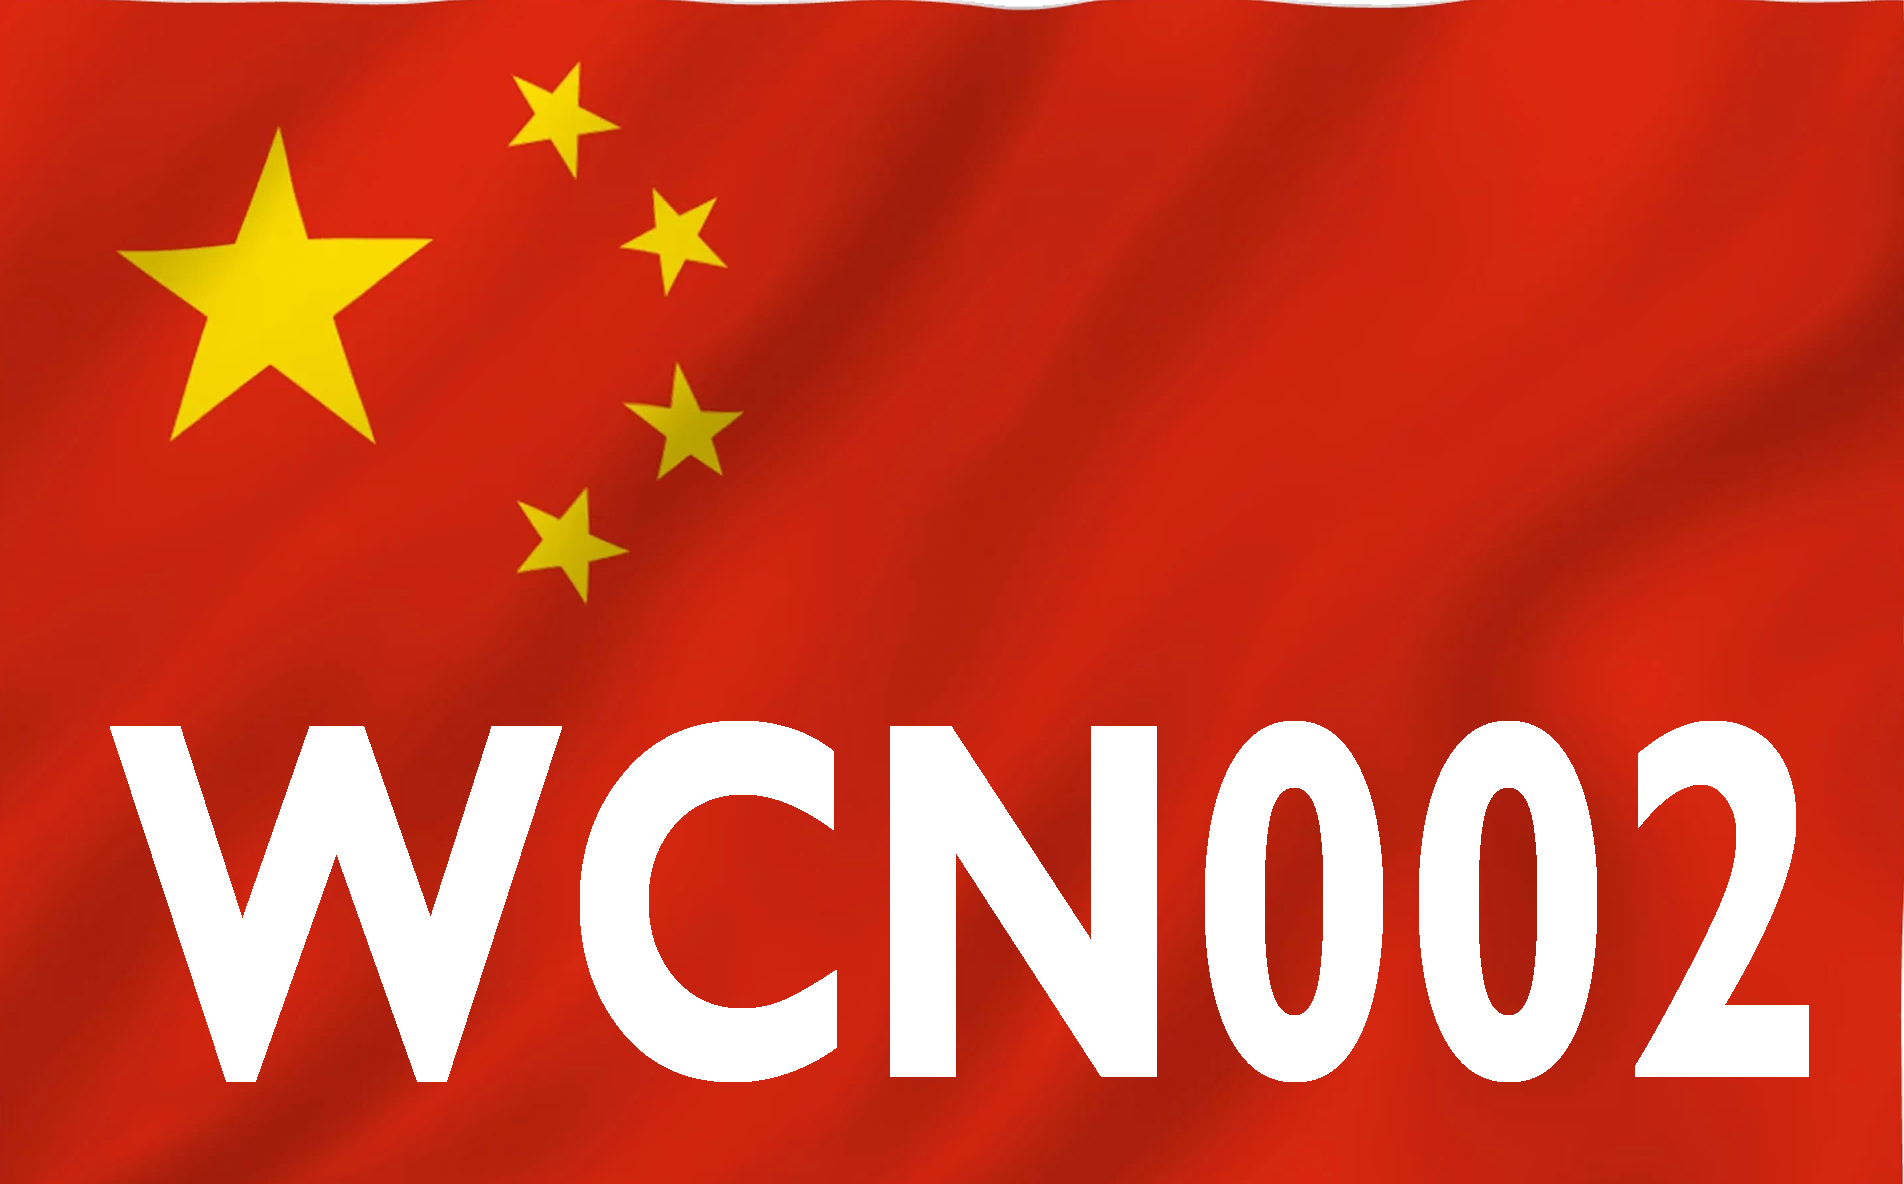 WCN002